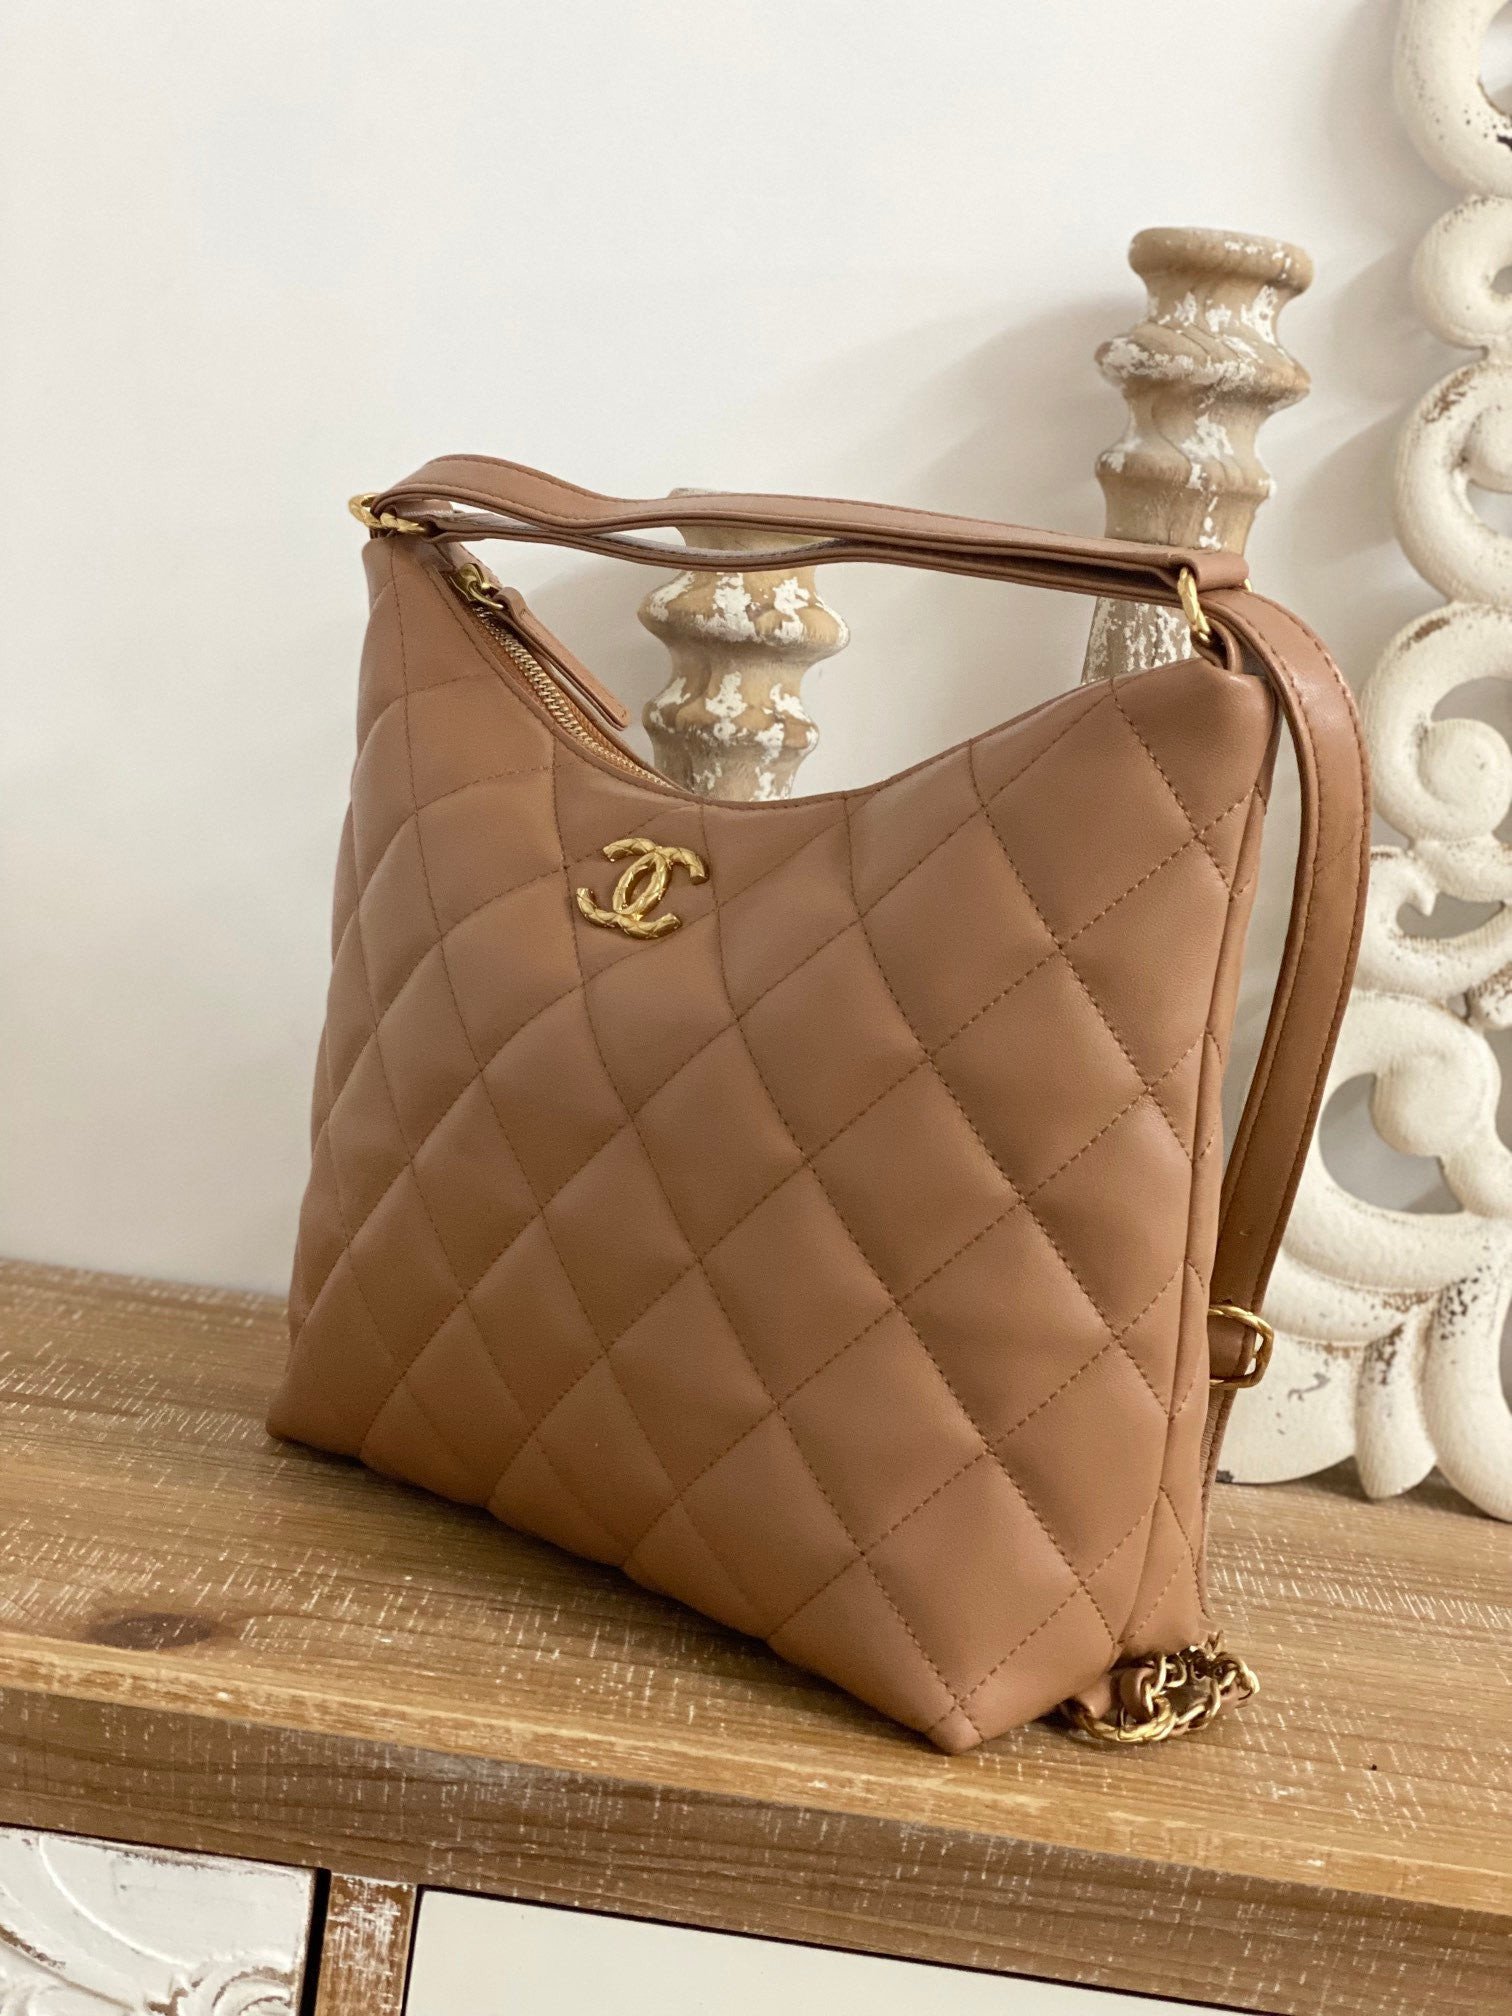 Chanel Maxi Hobo Bag In Brown - Praise To Heaven